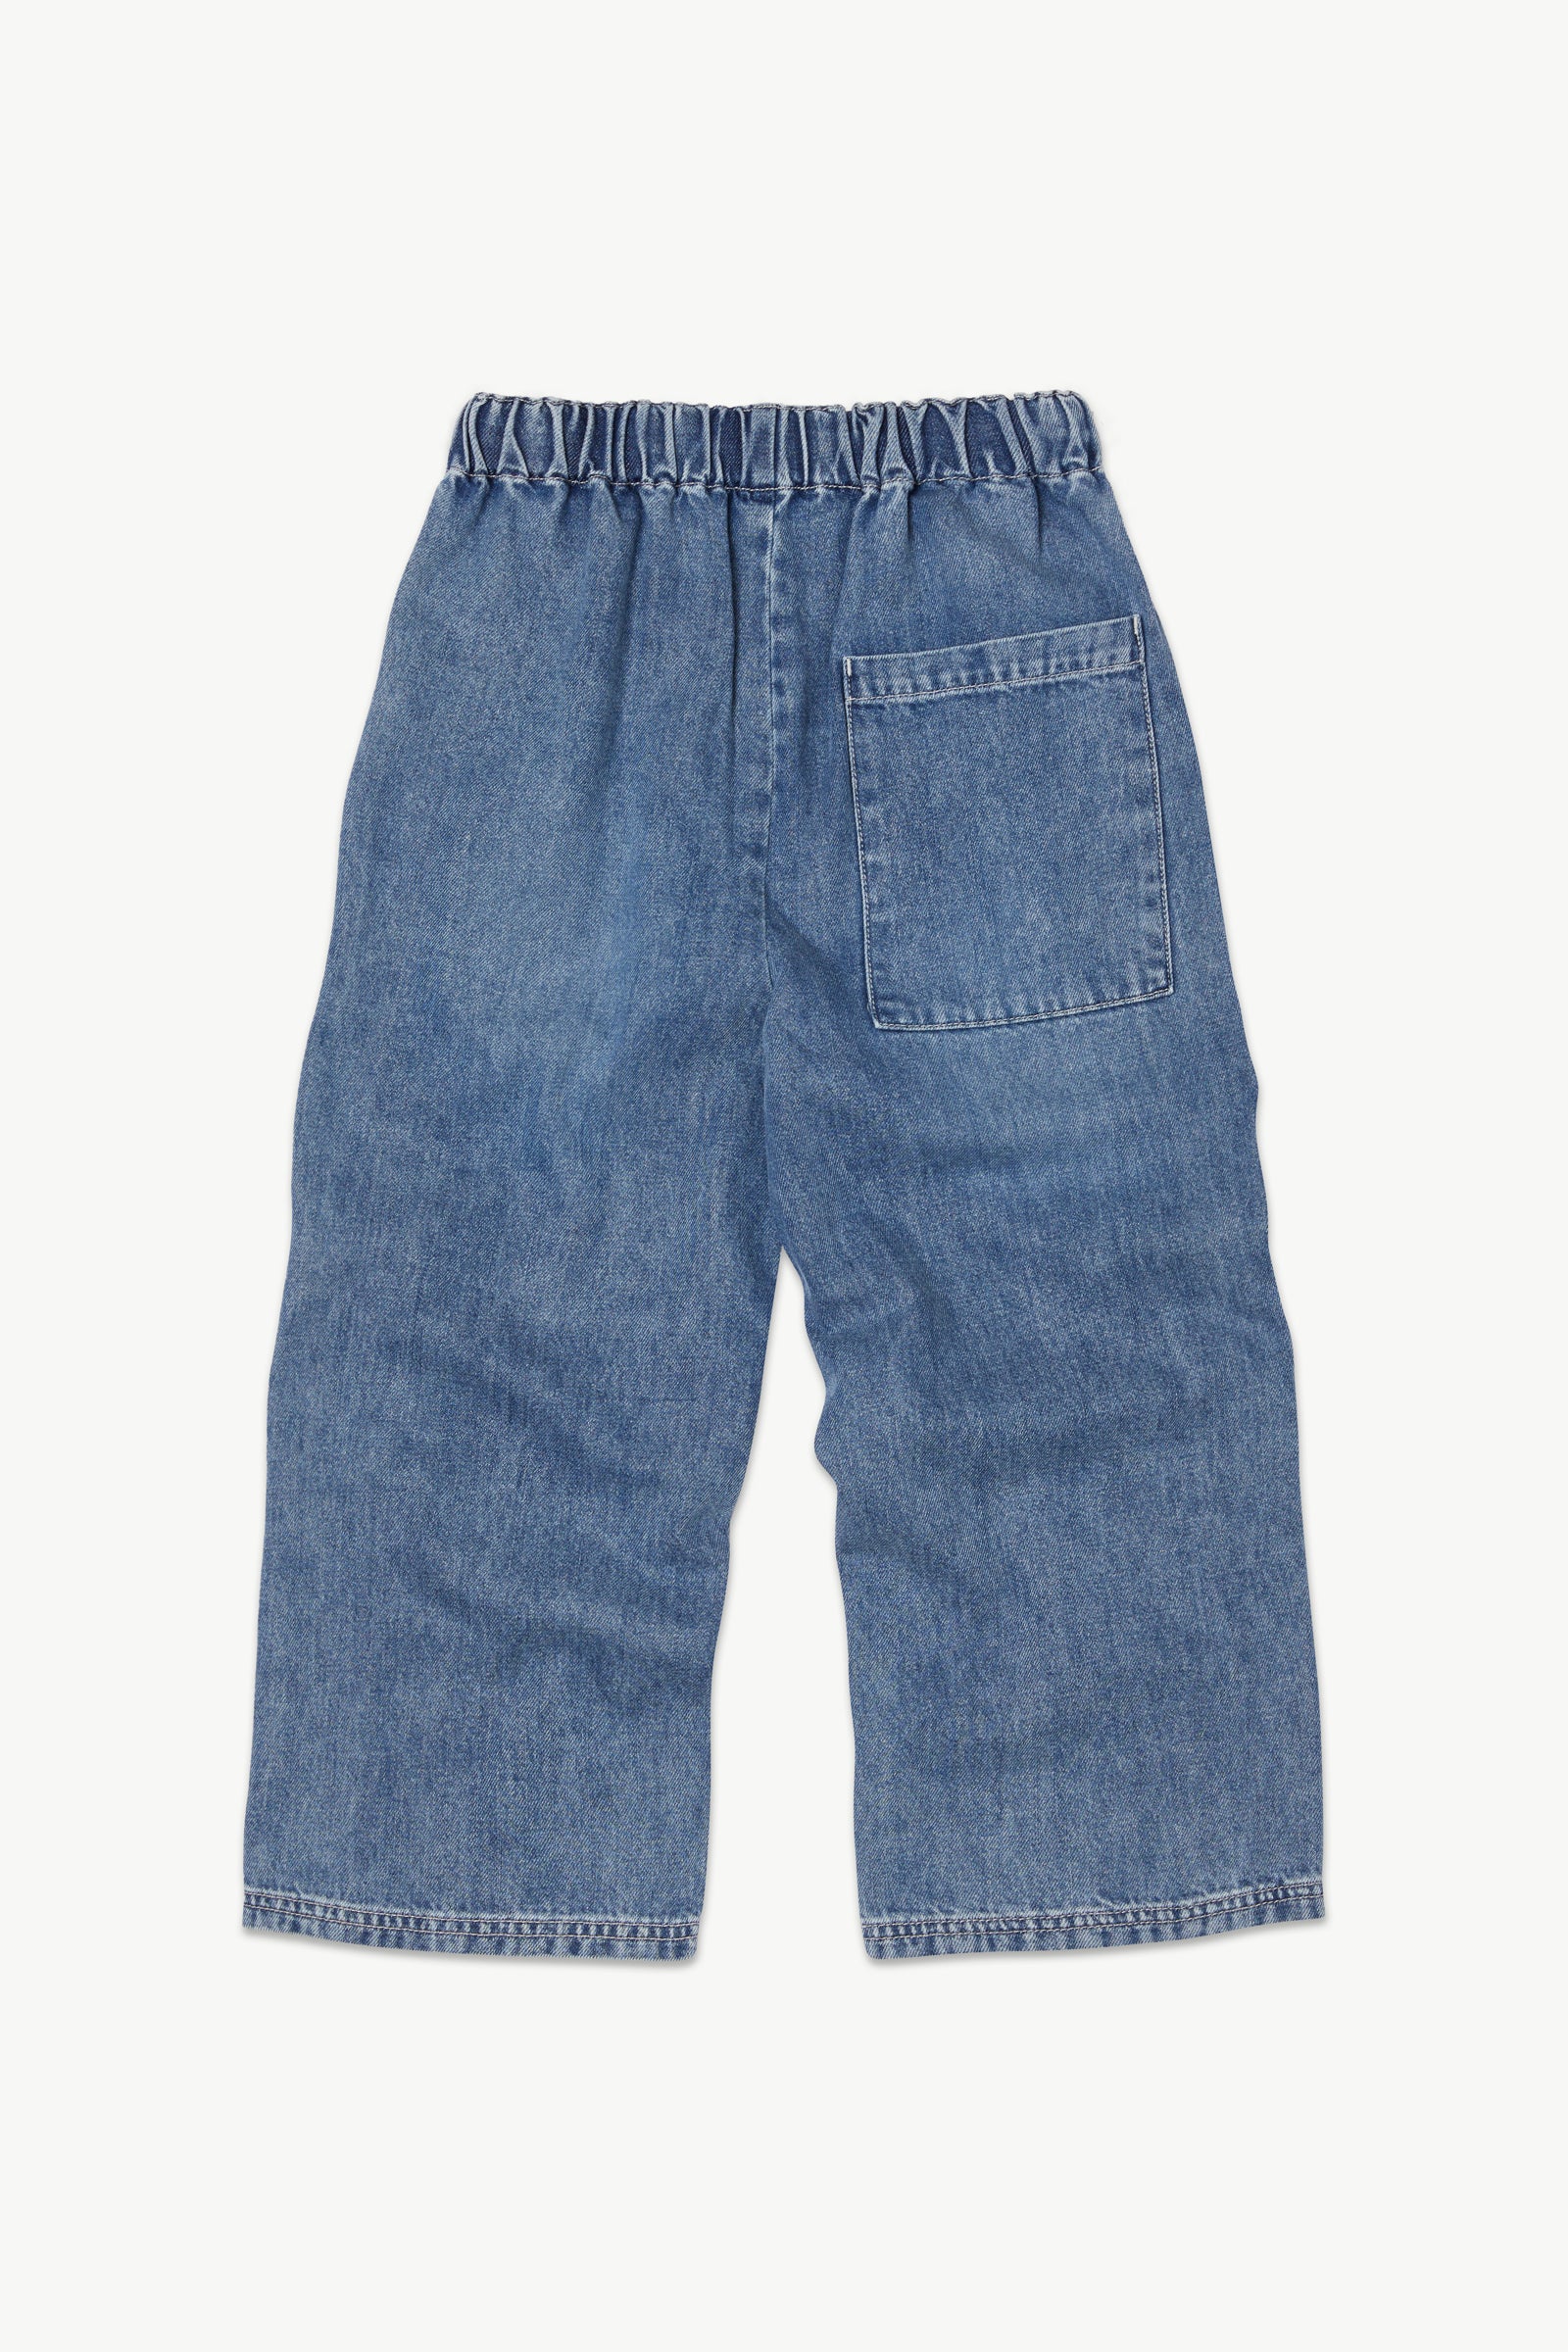 Main Story - relaxed pant - faded blue denim